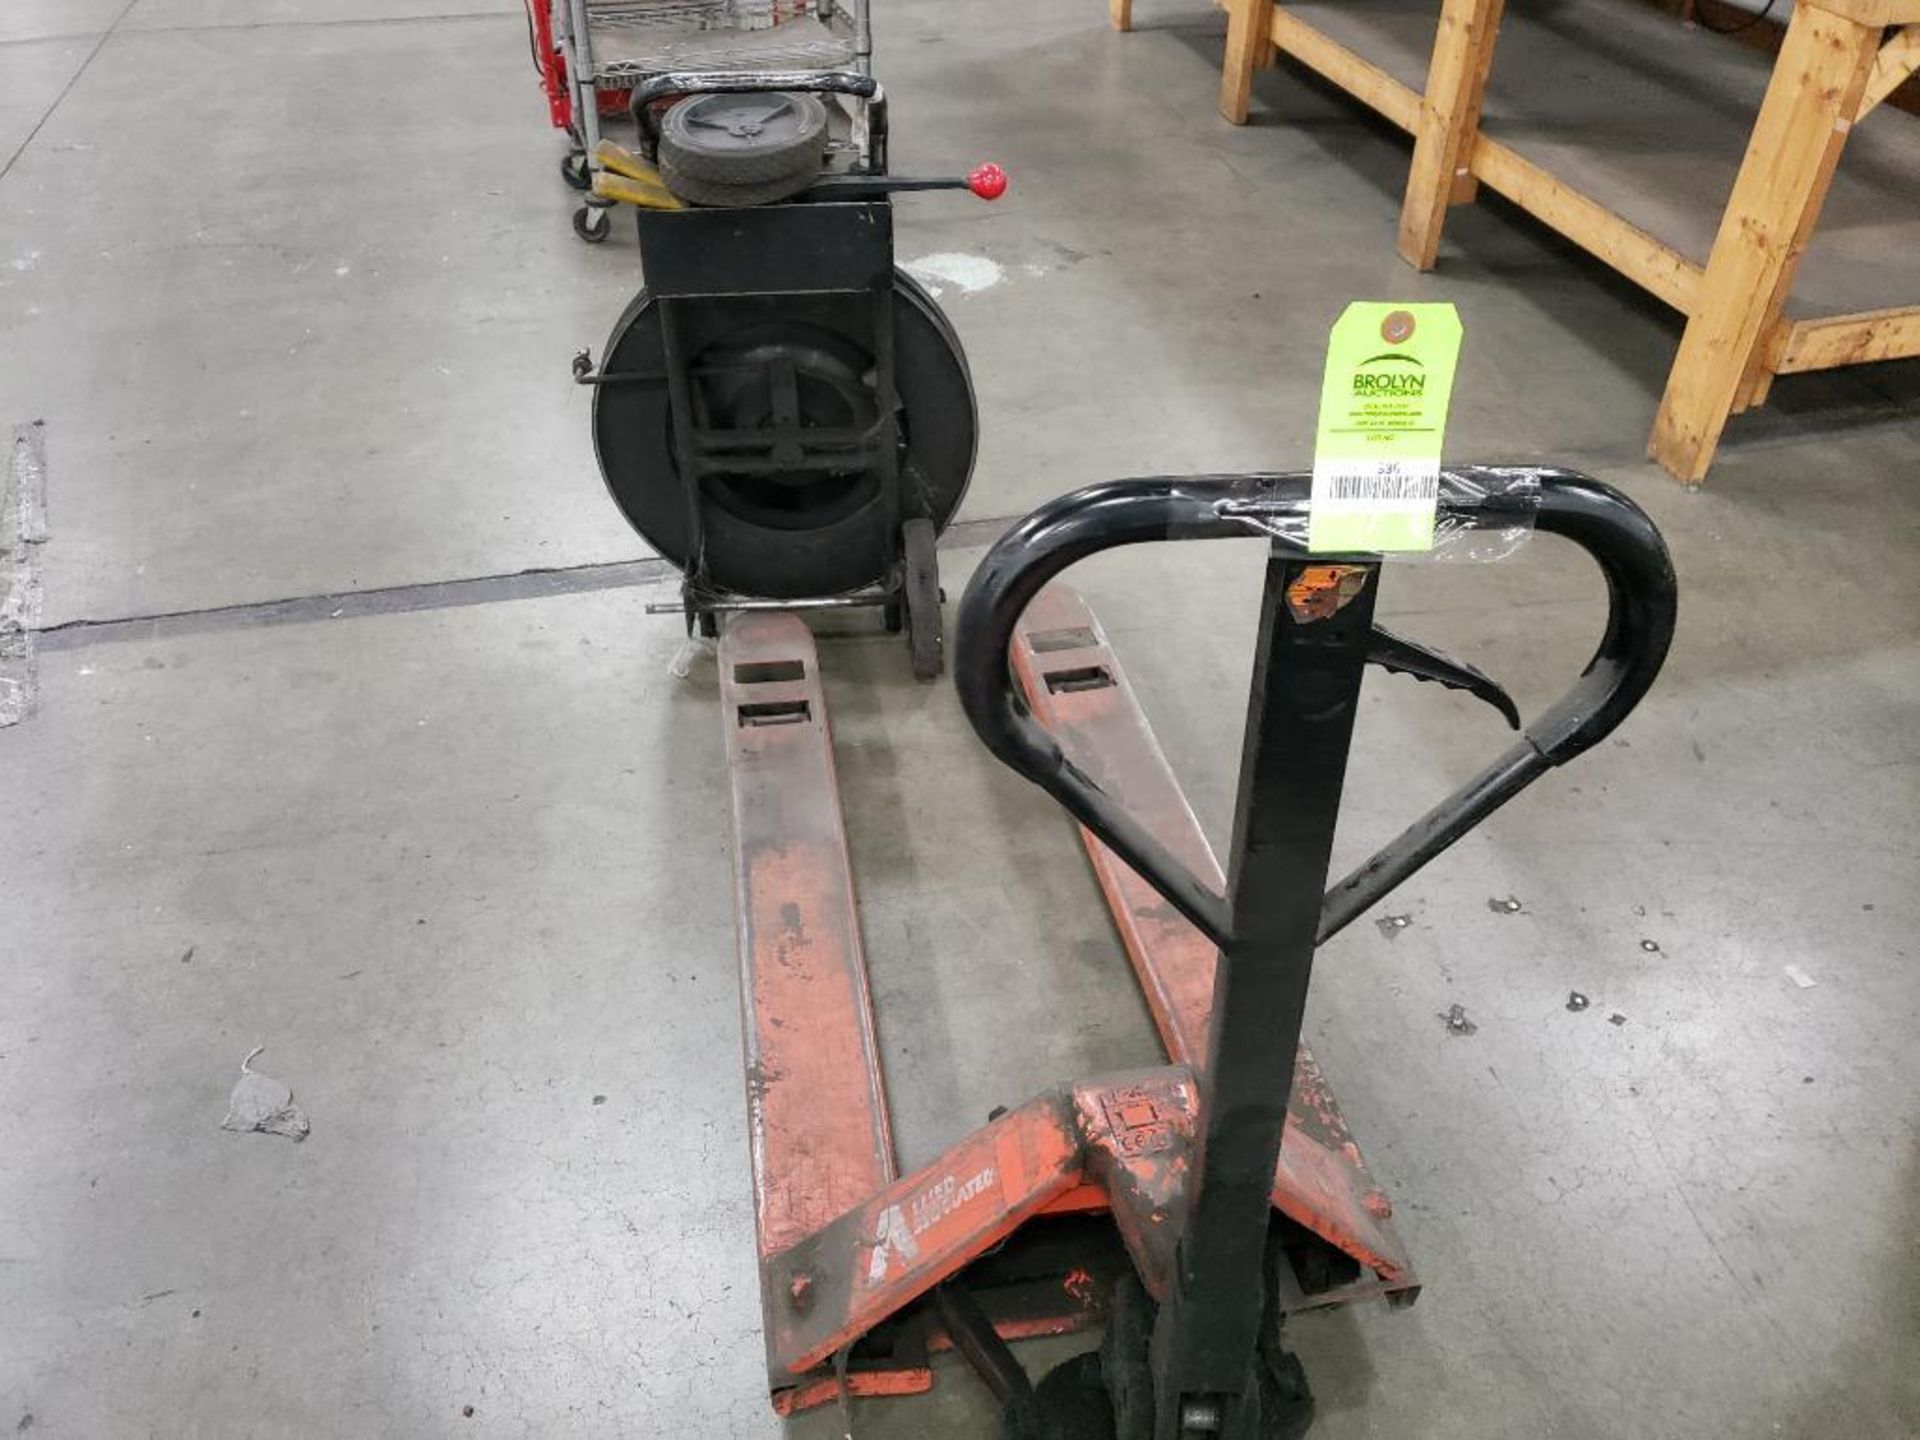 Pallet Jack and banding cart.